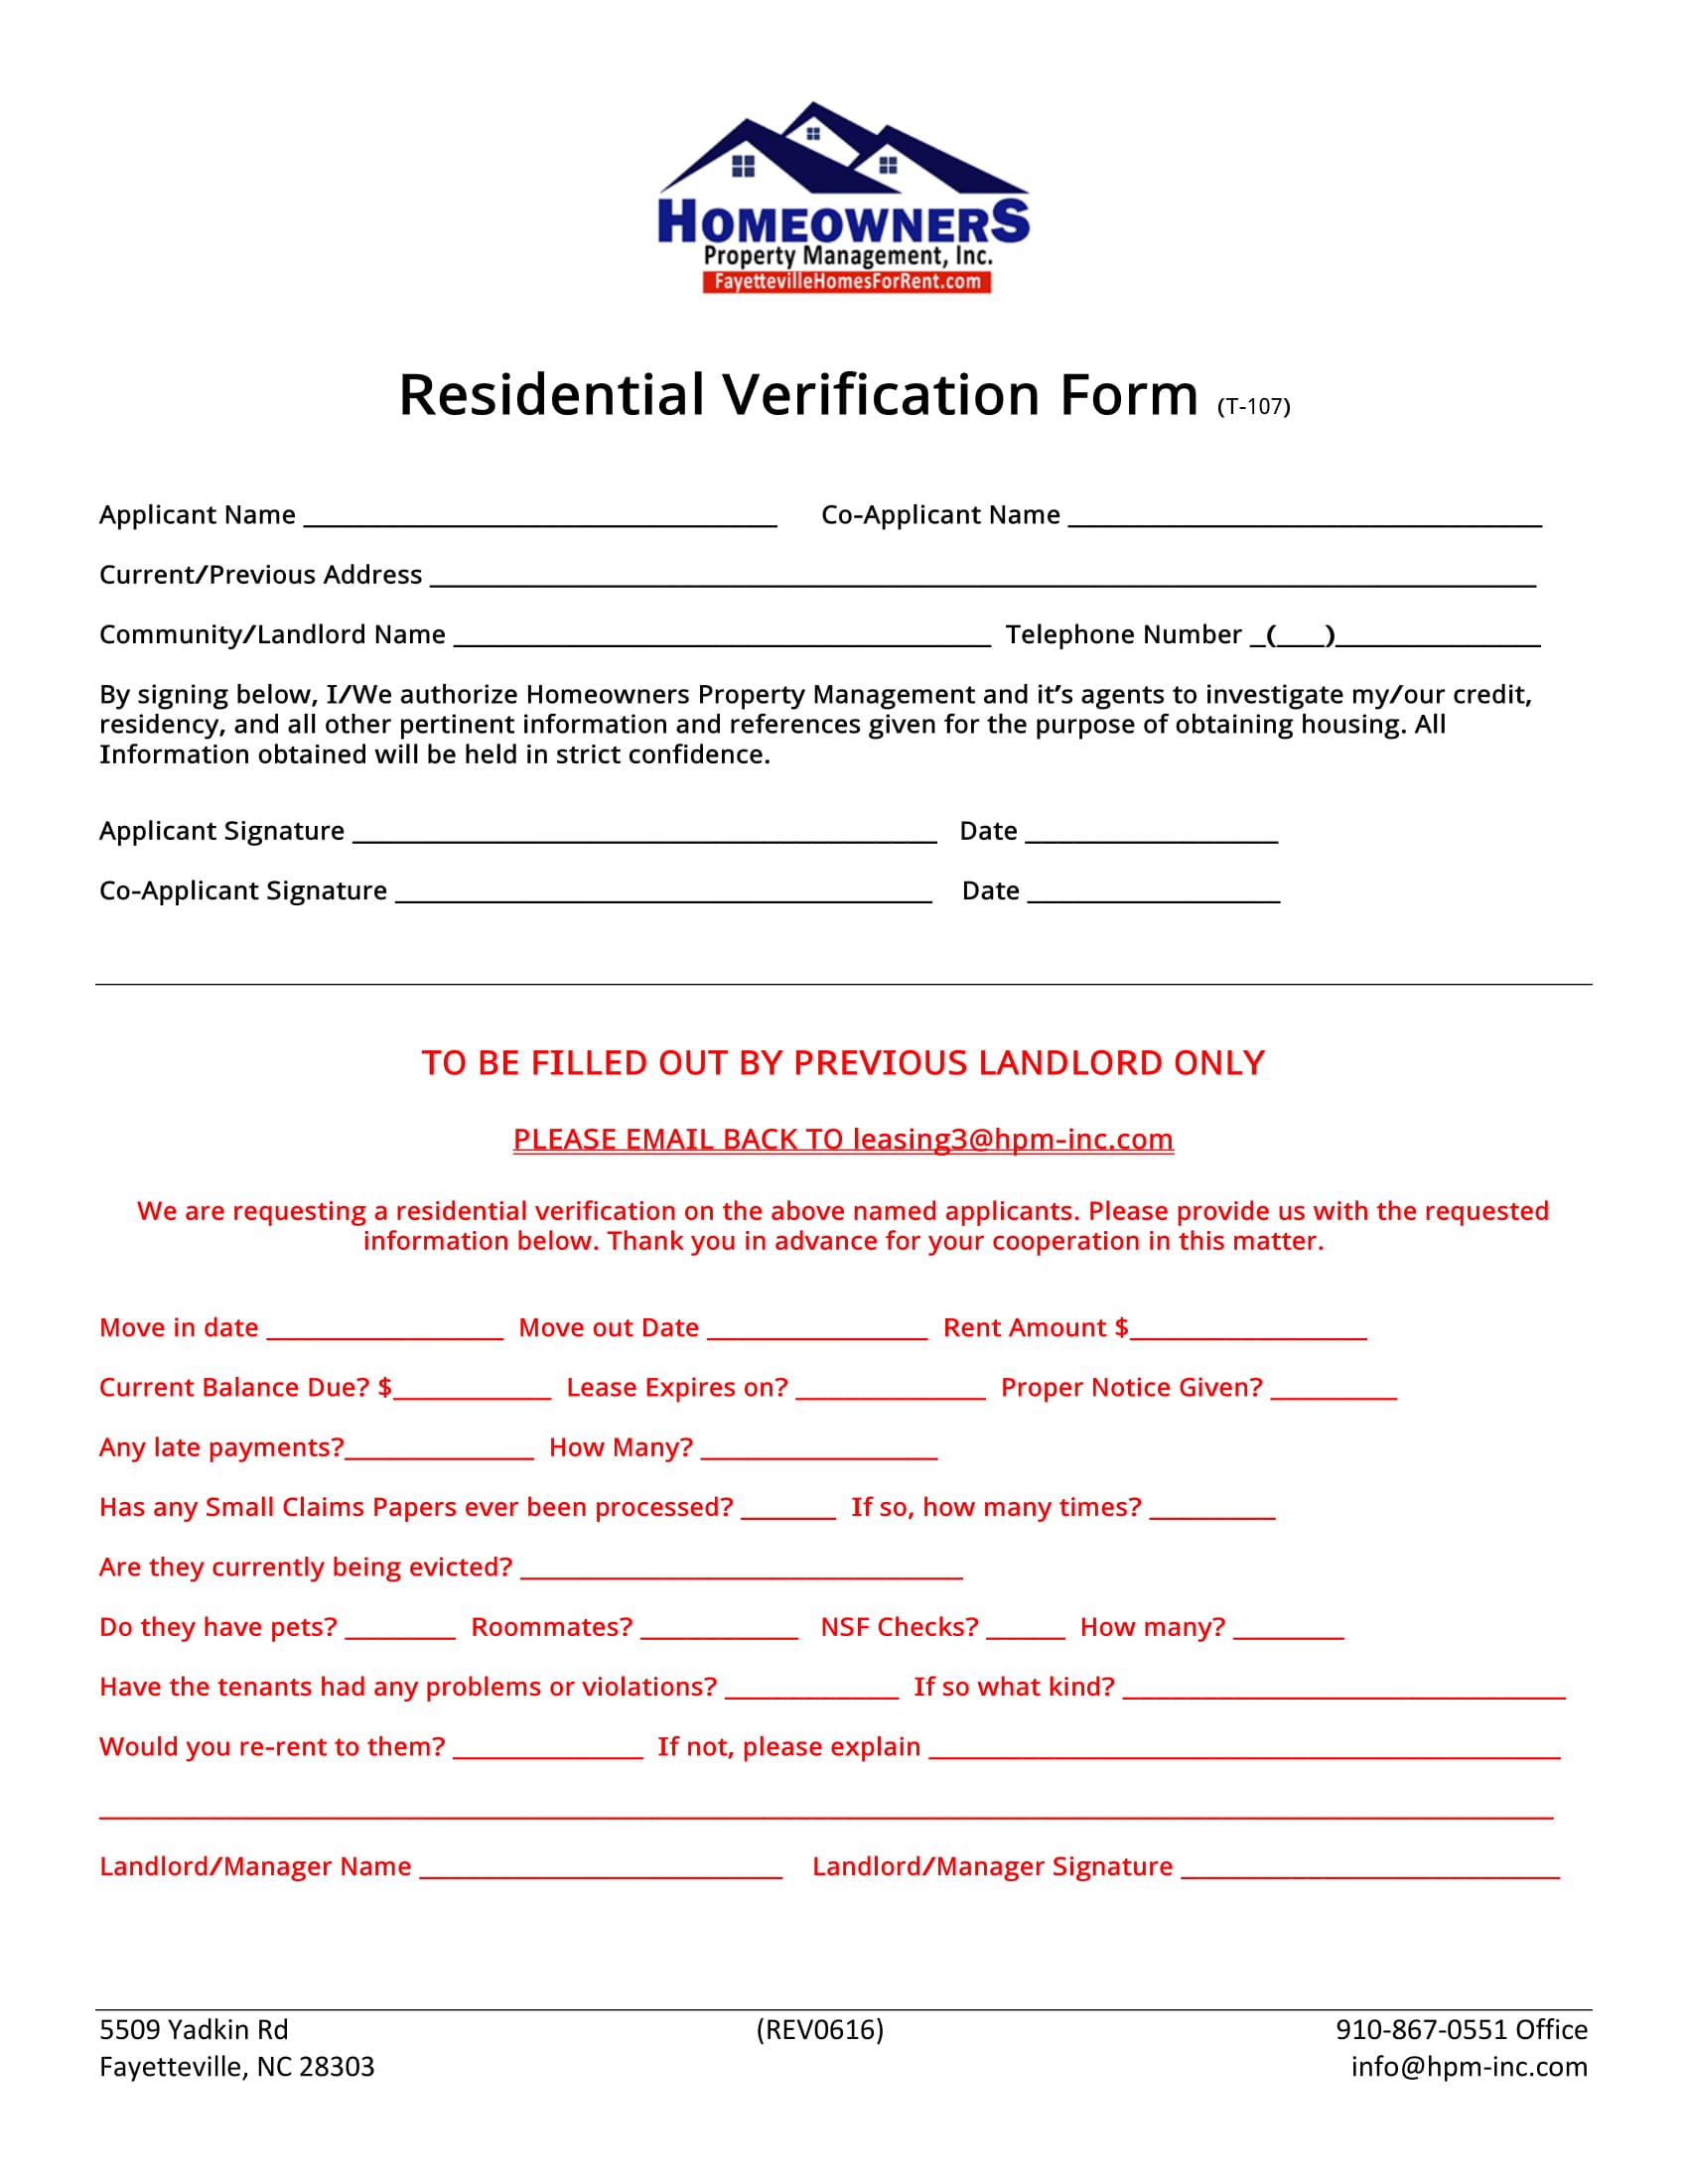 homeowners residential verification form 1